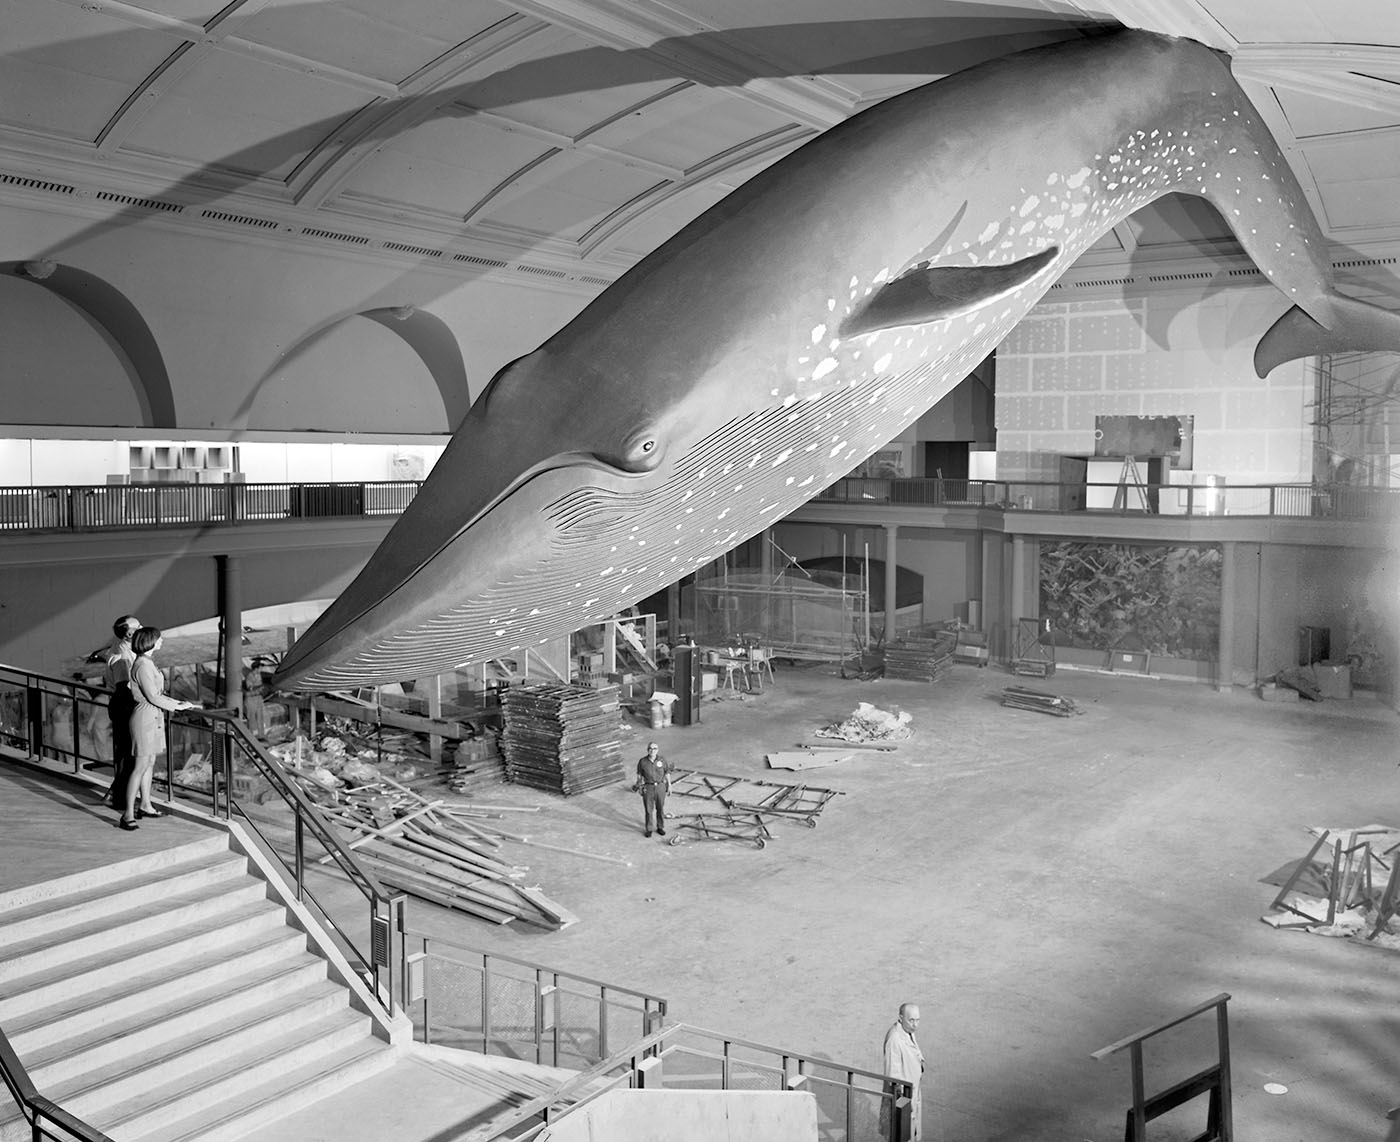 Archival image of the initial installation of the 94-foot-long blue whale model.